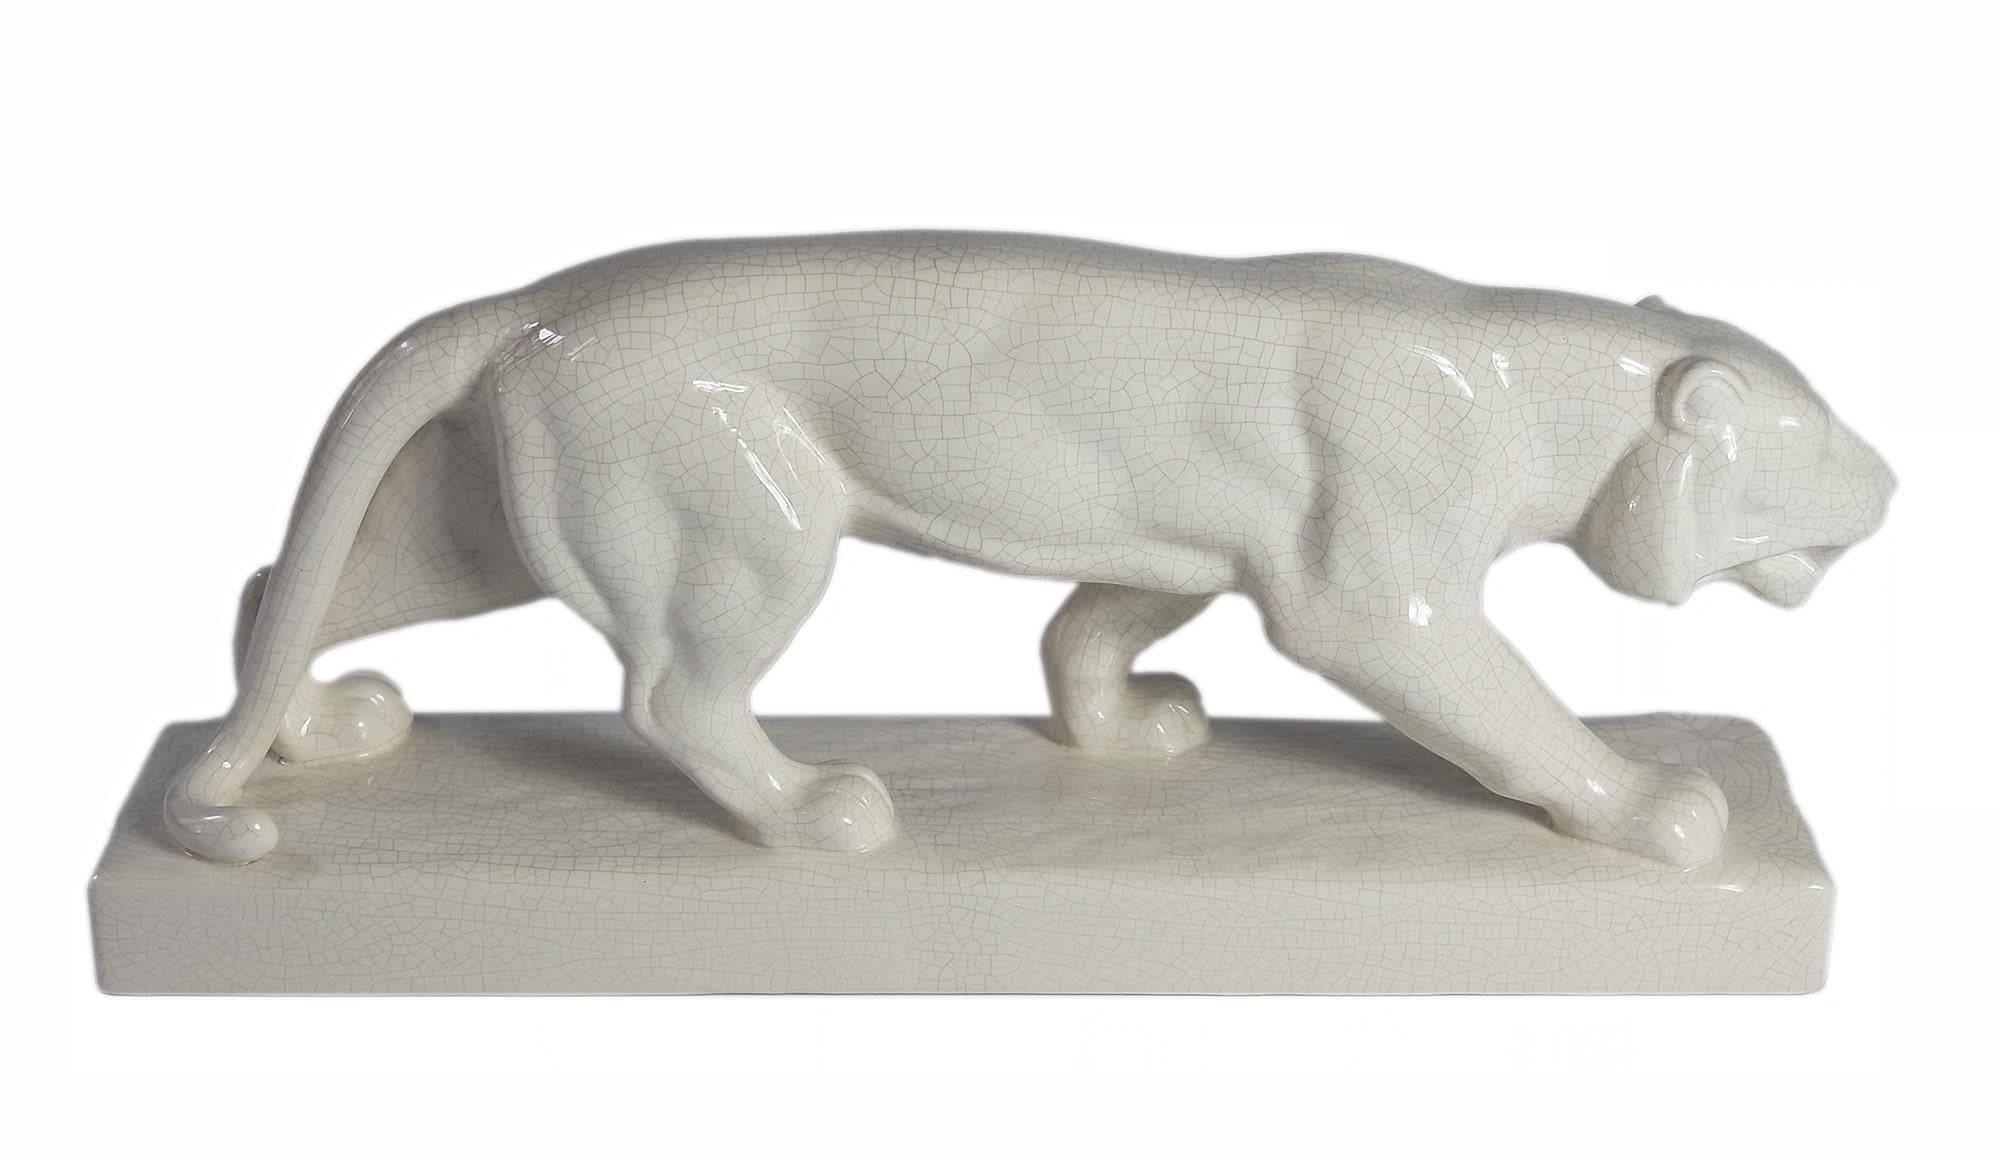 Emaux de Louviere ceramic panther sculpture from Art Deco period circa 1930's.
Hand crafted sneaking panther with crackle glazed surface in ivory colour.
Marked on the bottom.